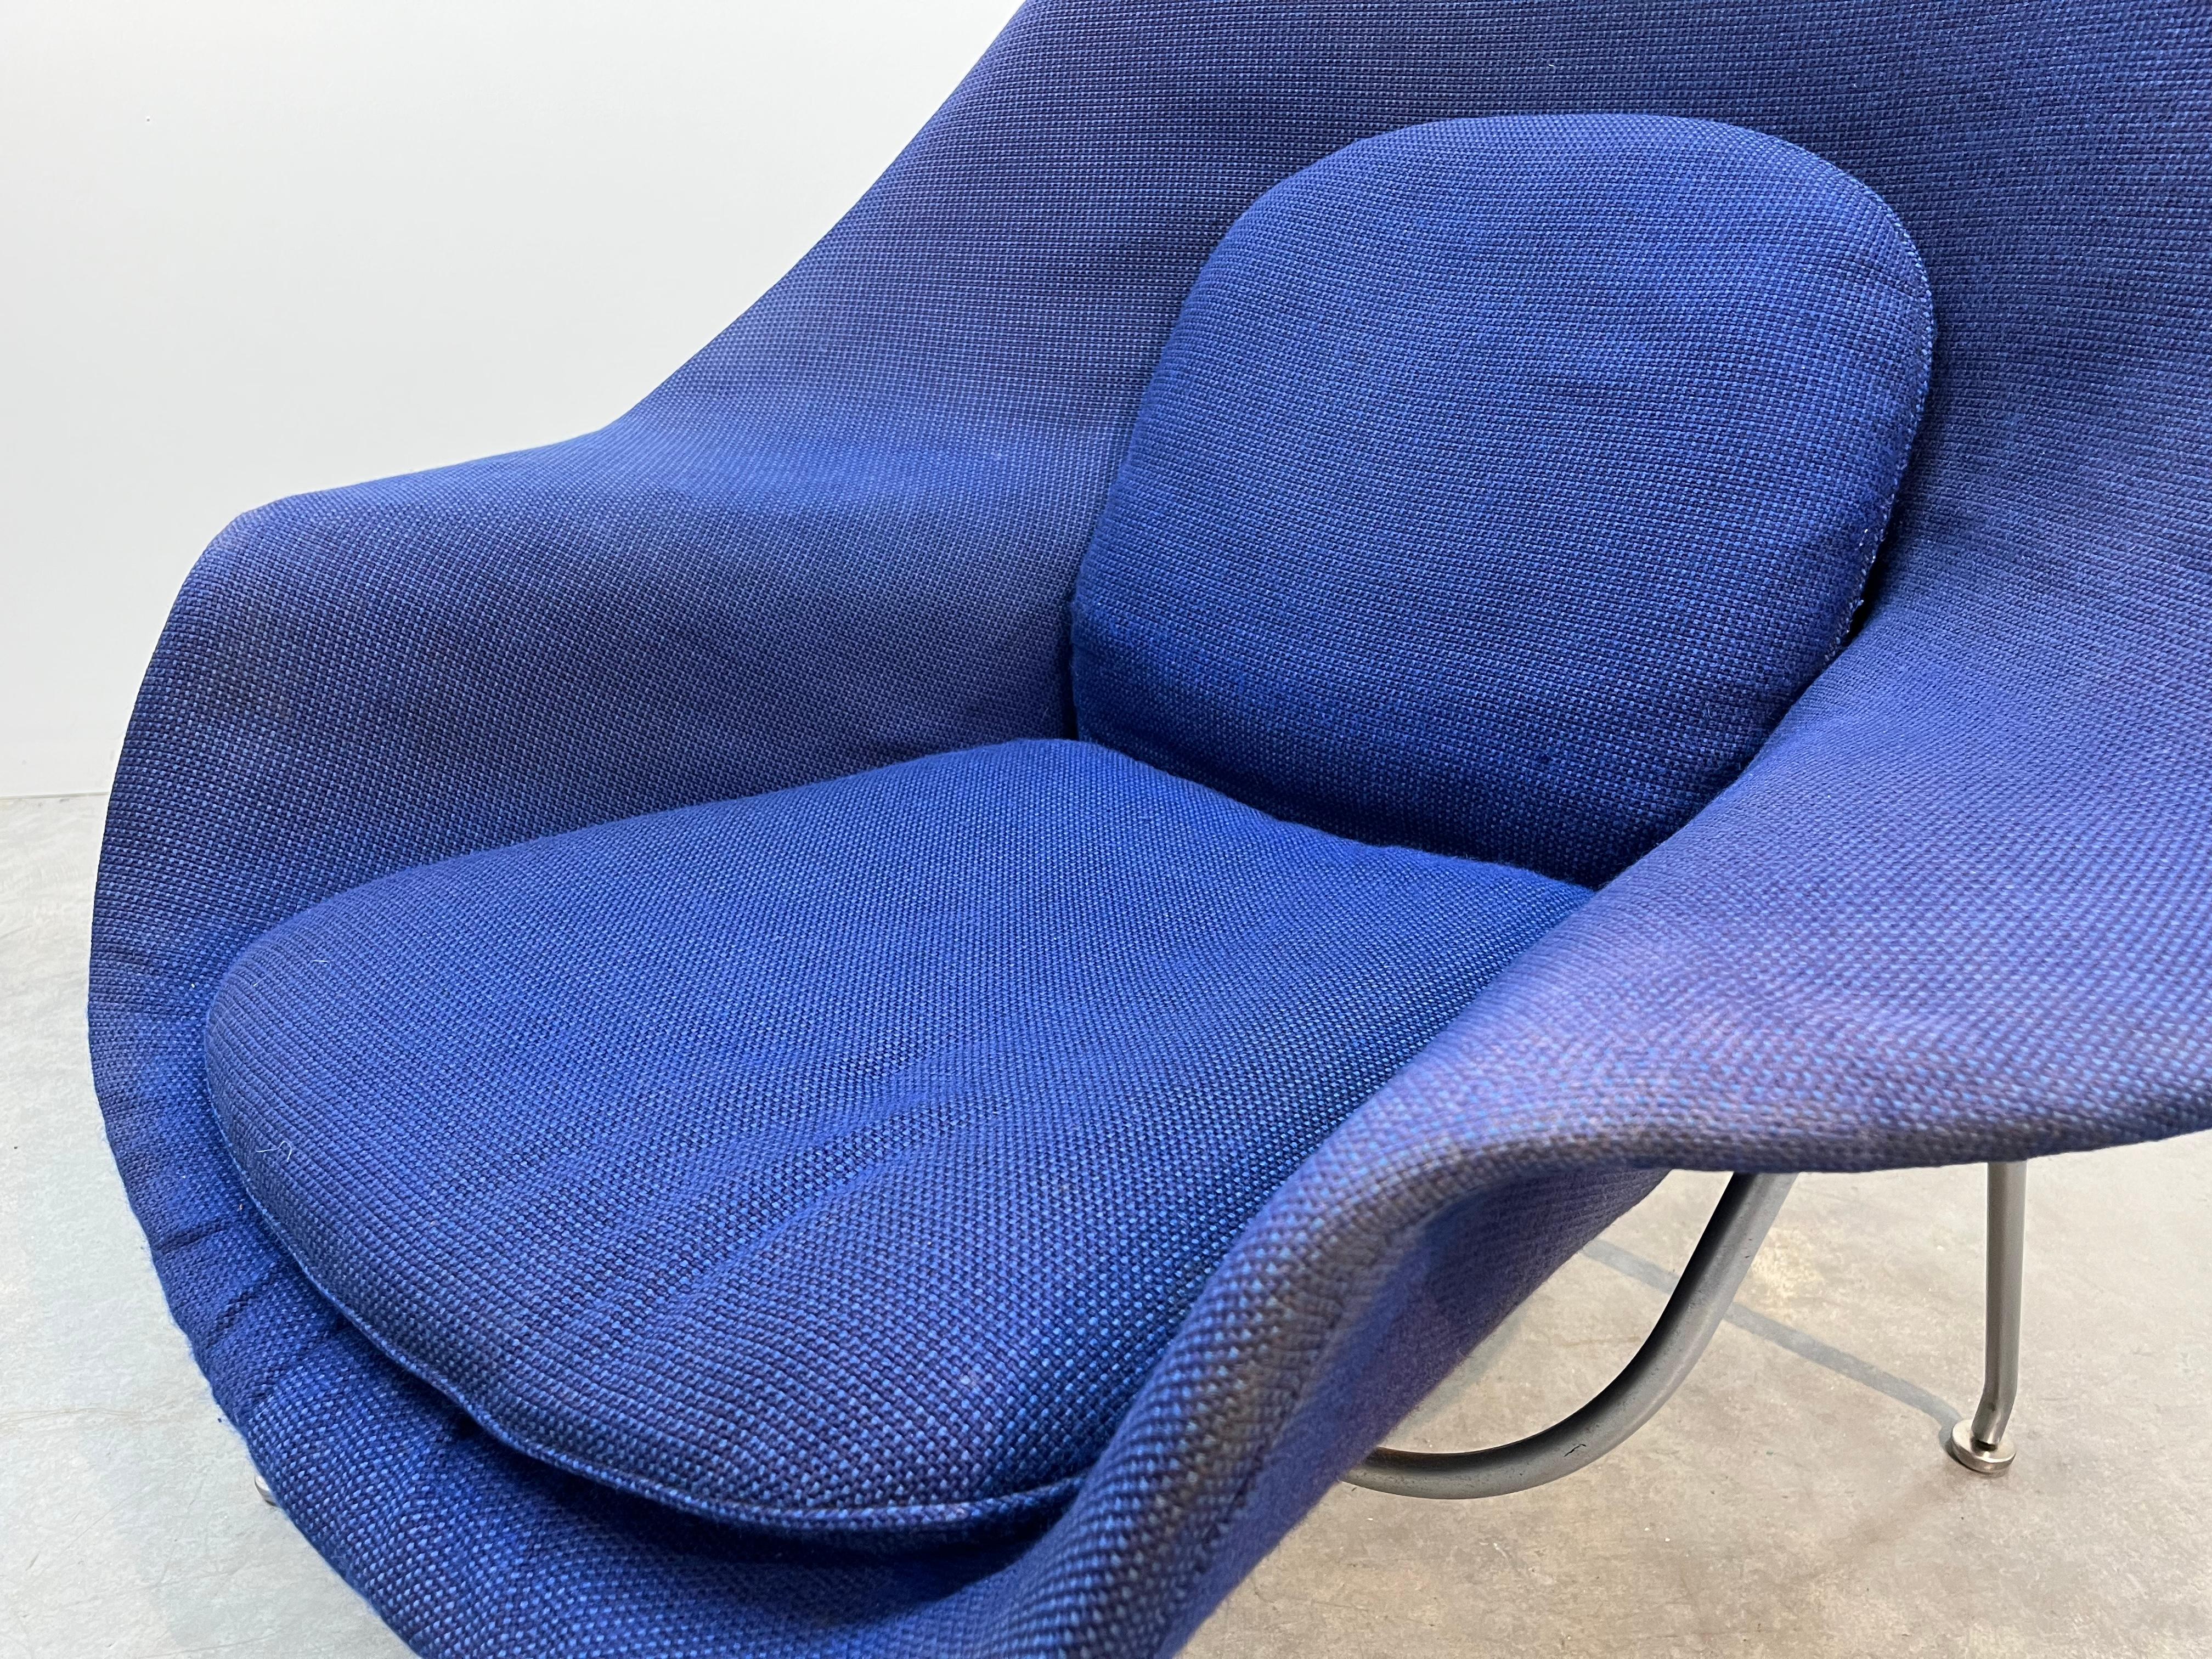 Eero Saarinen for Knoll Womb chair and ottoman circa 1960 as having rare original Knoll Cornflower Blue tweed upholstery. 
 In beautiful original condition having wonderful patina being gently used and cared for by its original owner. Original